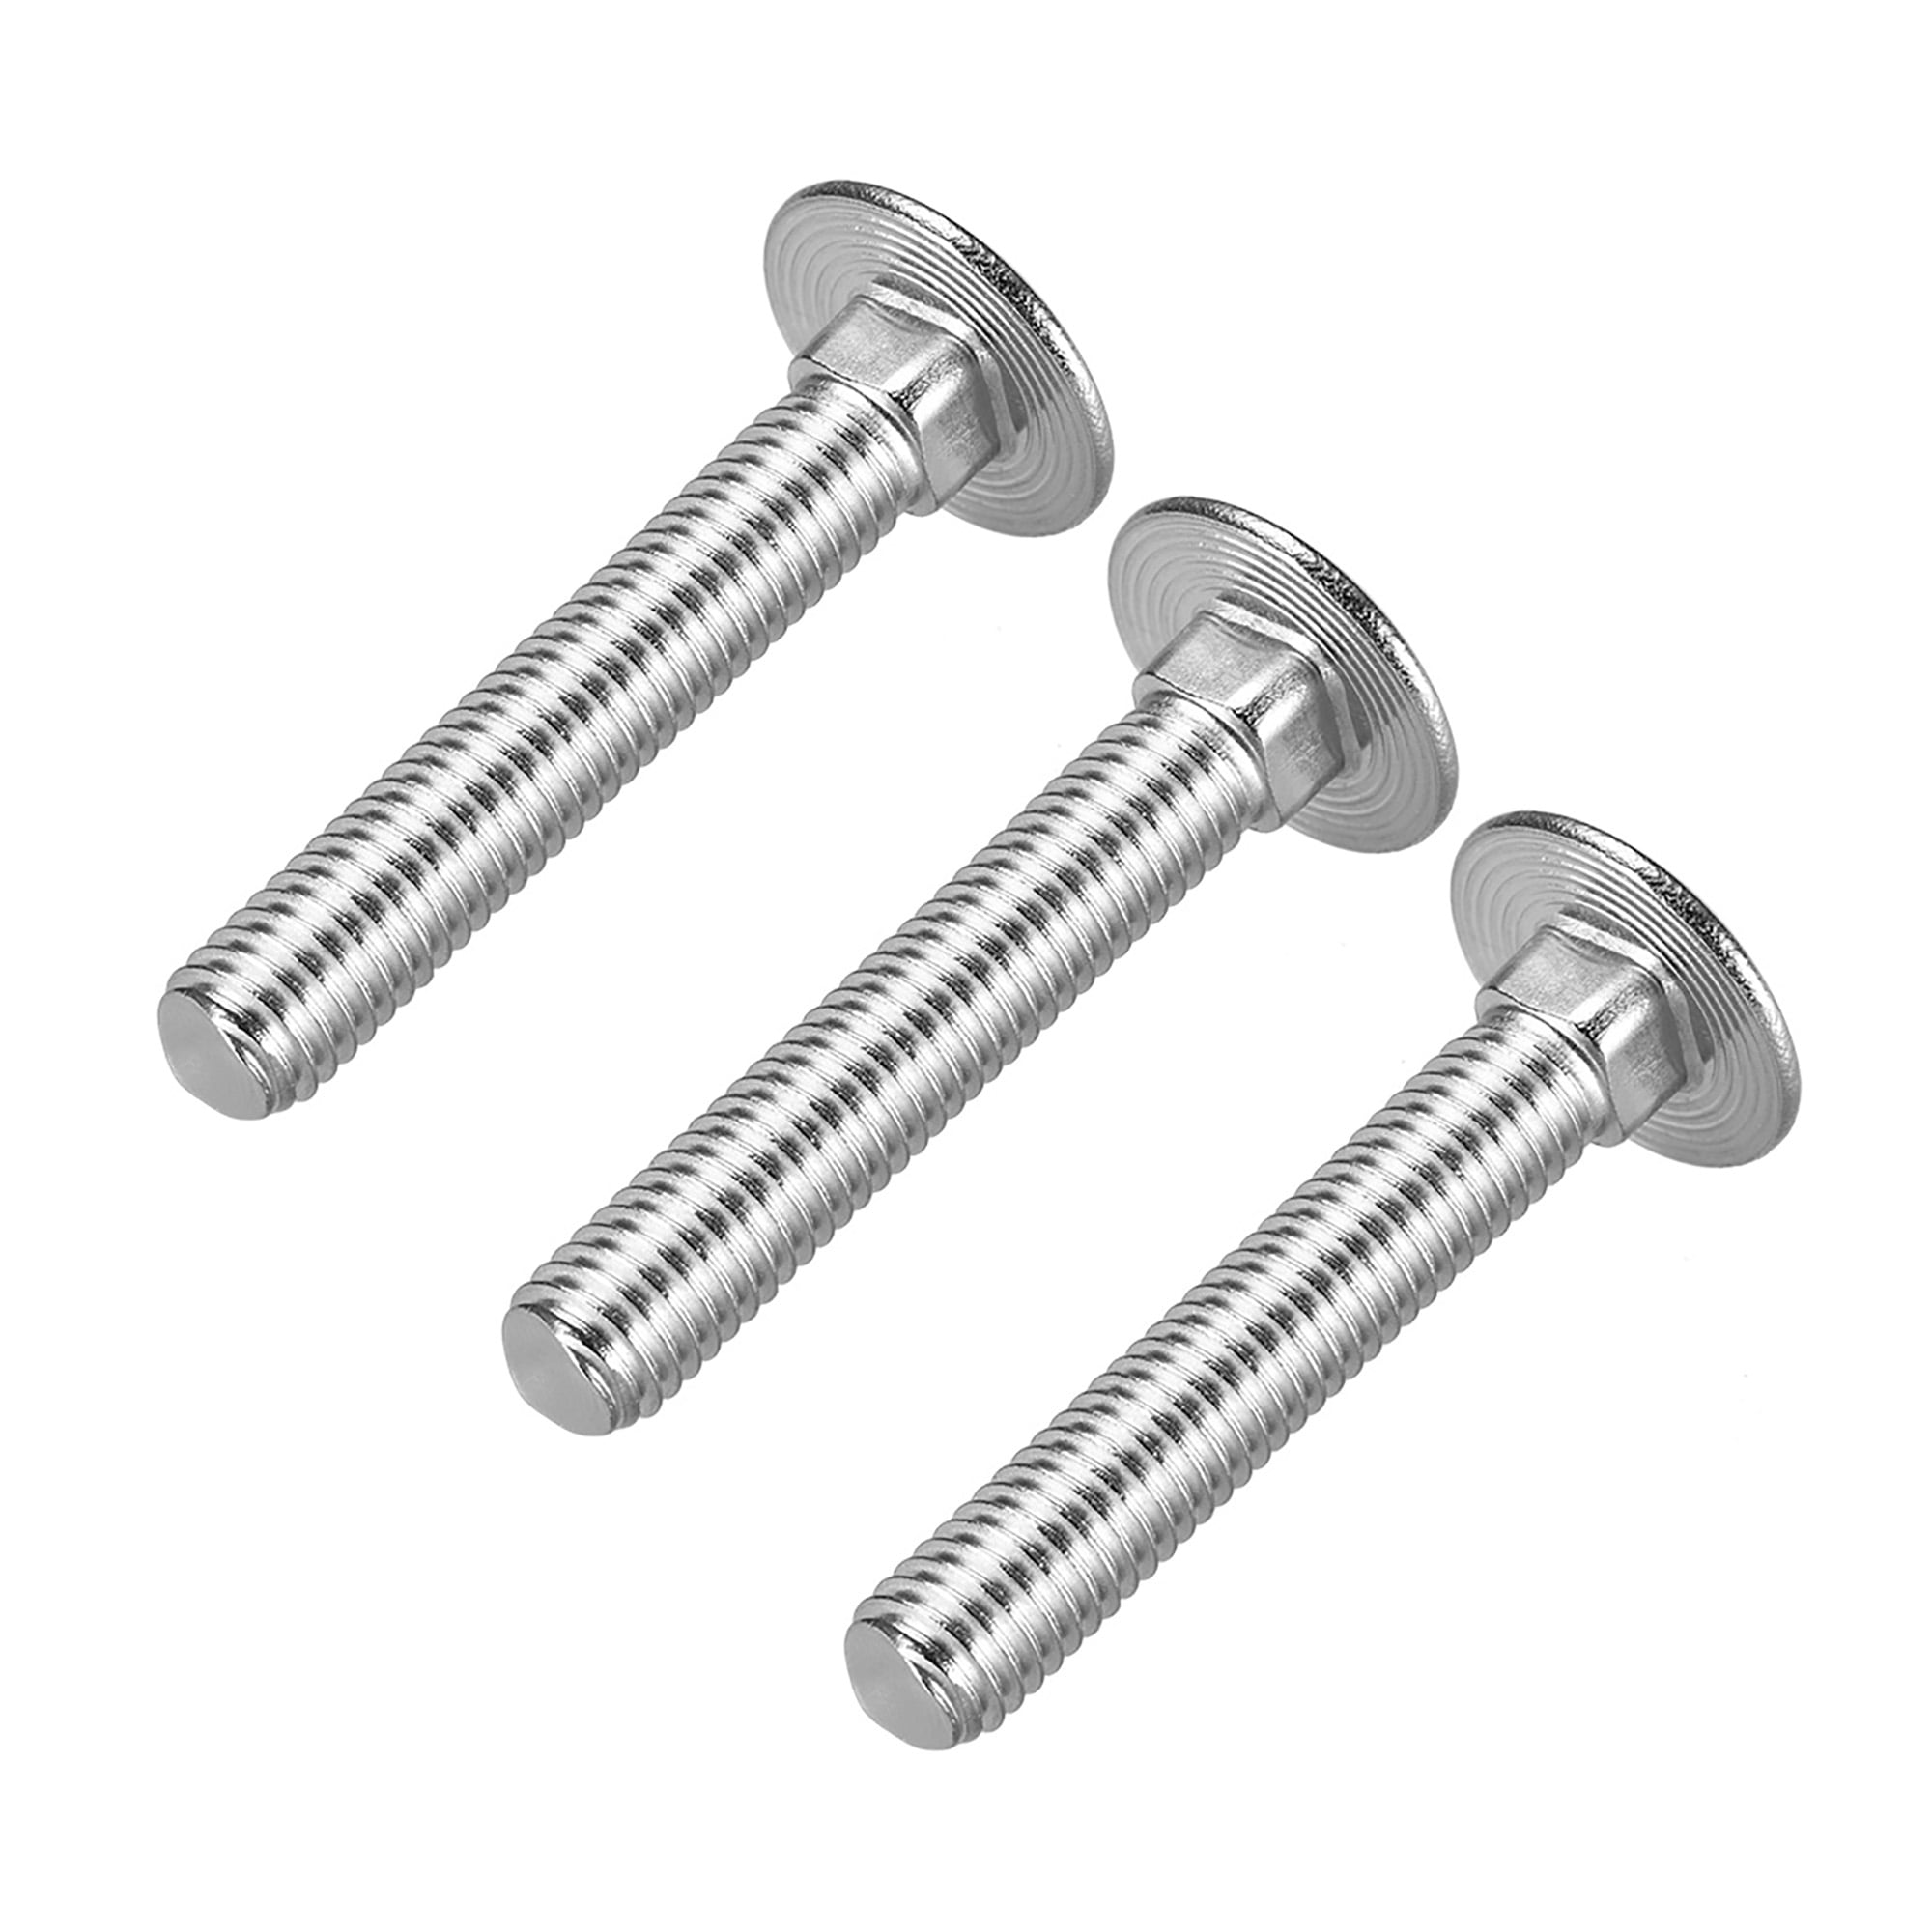 BOL-69014 Carriage Bolts Neck Carriage Bolt Round Head Square Neck 304 Stainless Steel M6x20mm 10pcs- Type: M6x20mm-10pcs